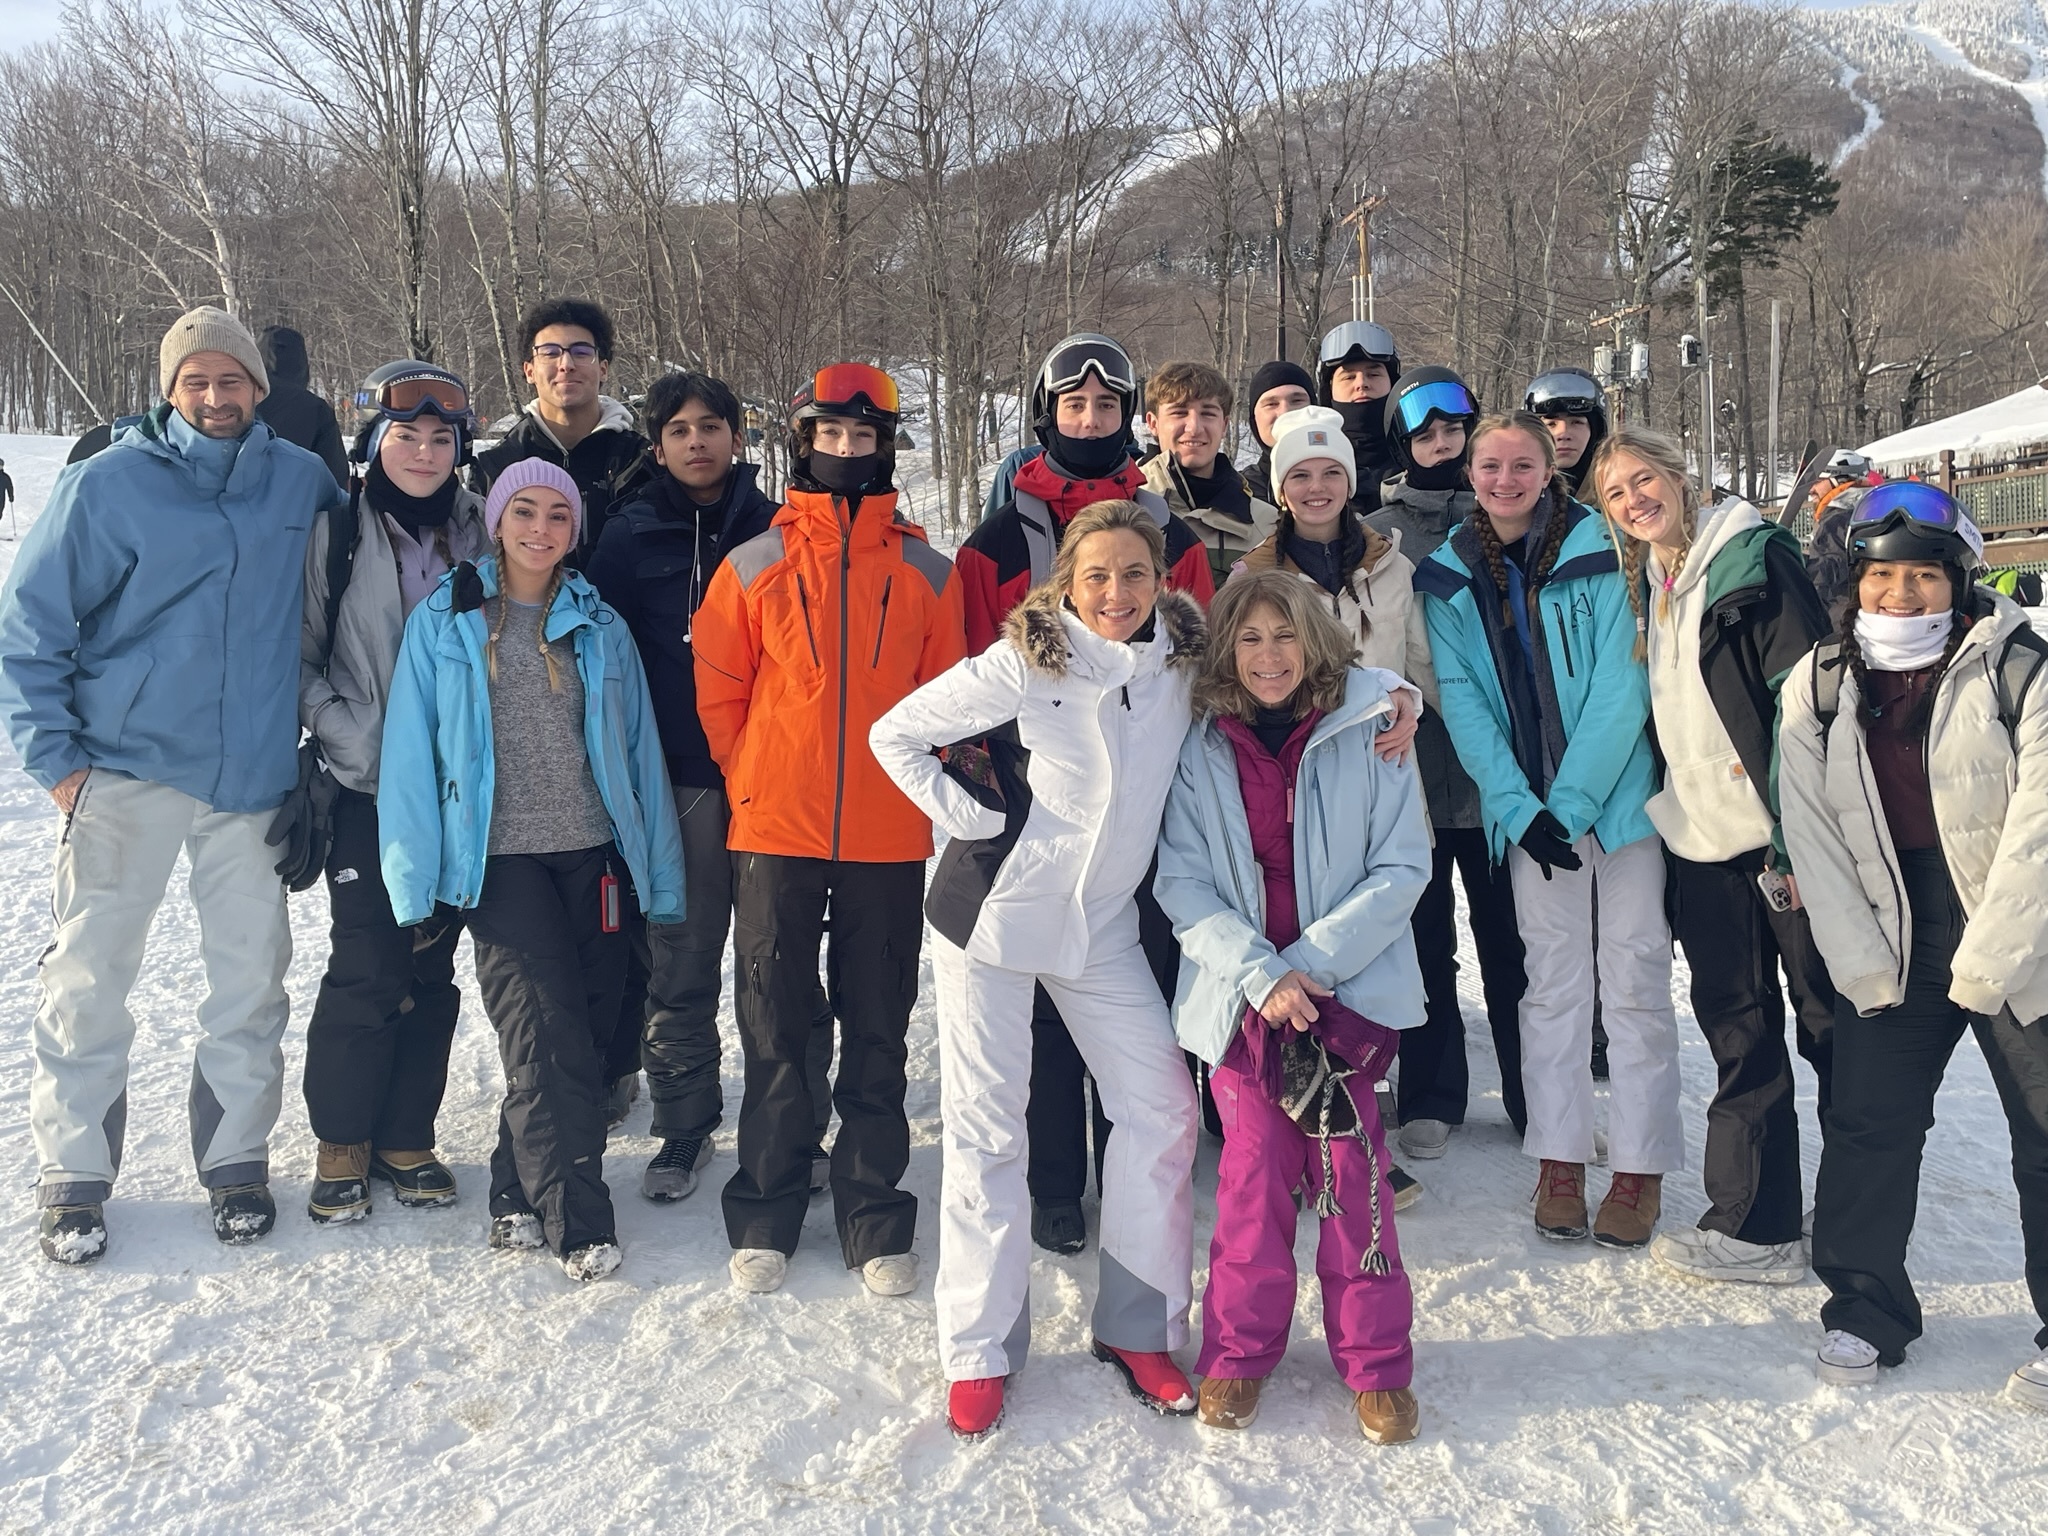 Members of Southampton High School’s Outing Club recently took a ski trip to Stowe, Vermont. The 39 students, along with former teacher and Outing Club adviser Tina Lengyel and current language teachers and Outing Club advisers Mitti Abbadessa and David Riley, took on the slopes during the overnight trip. The group included advanced skiers, as well as first-timers. COURTESY SOUTHAMPTON SCHOOL DISTRICT